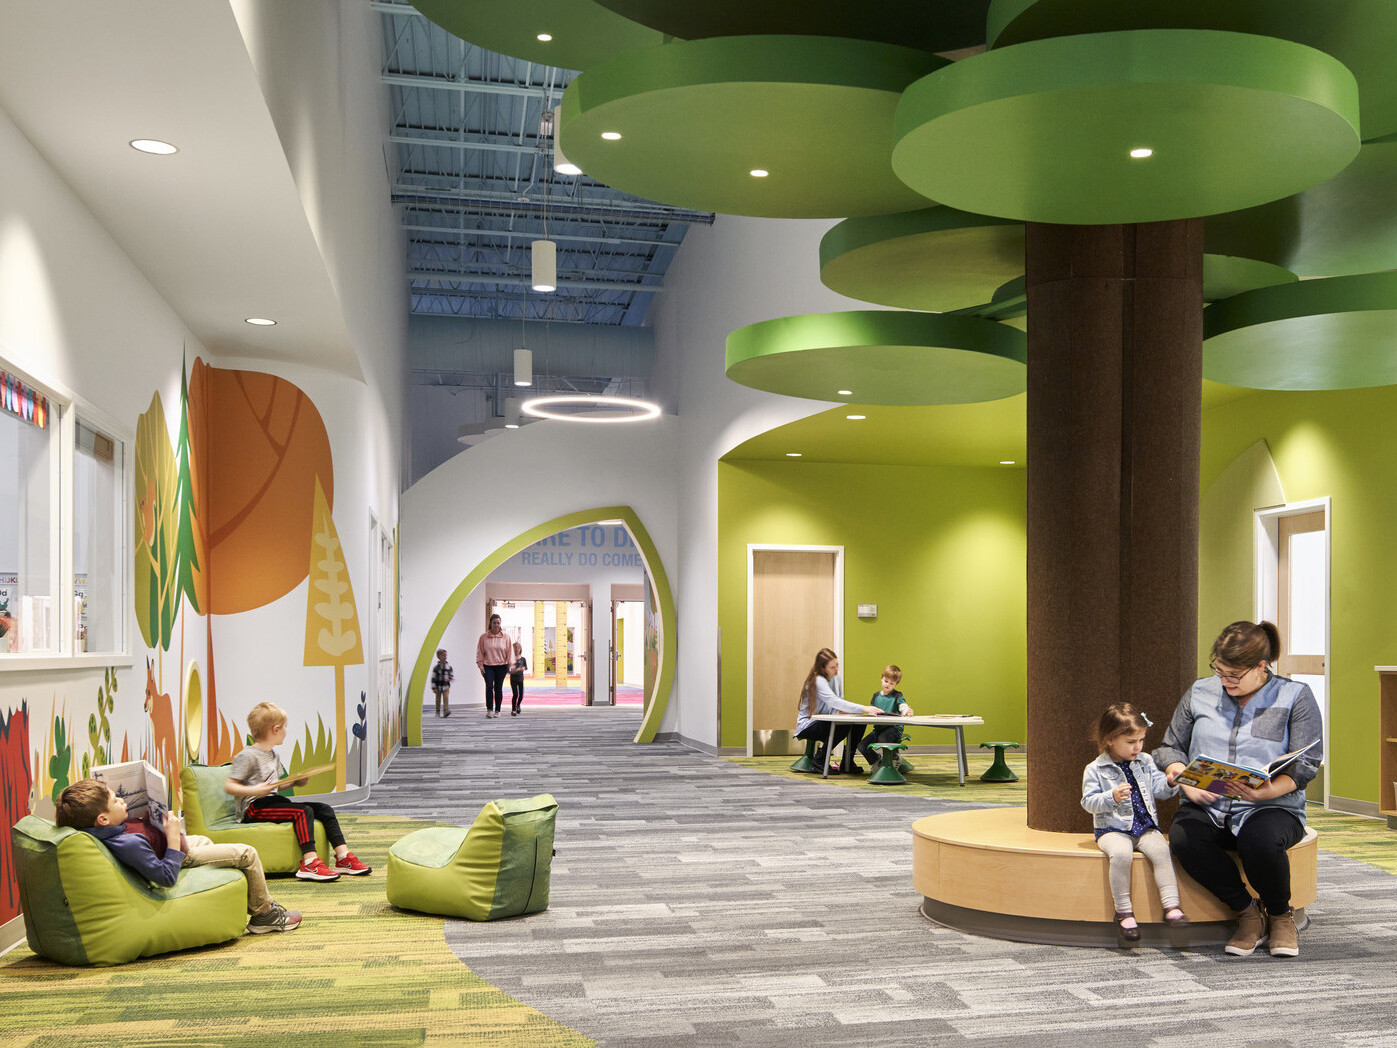 people reading on a brown circular bench with a brown column and green ceiling fixtures in hallway lined with forest graphics